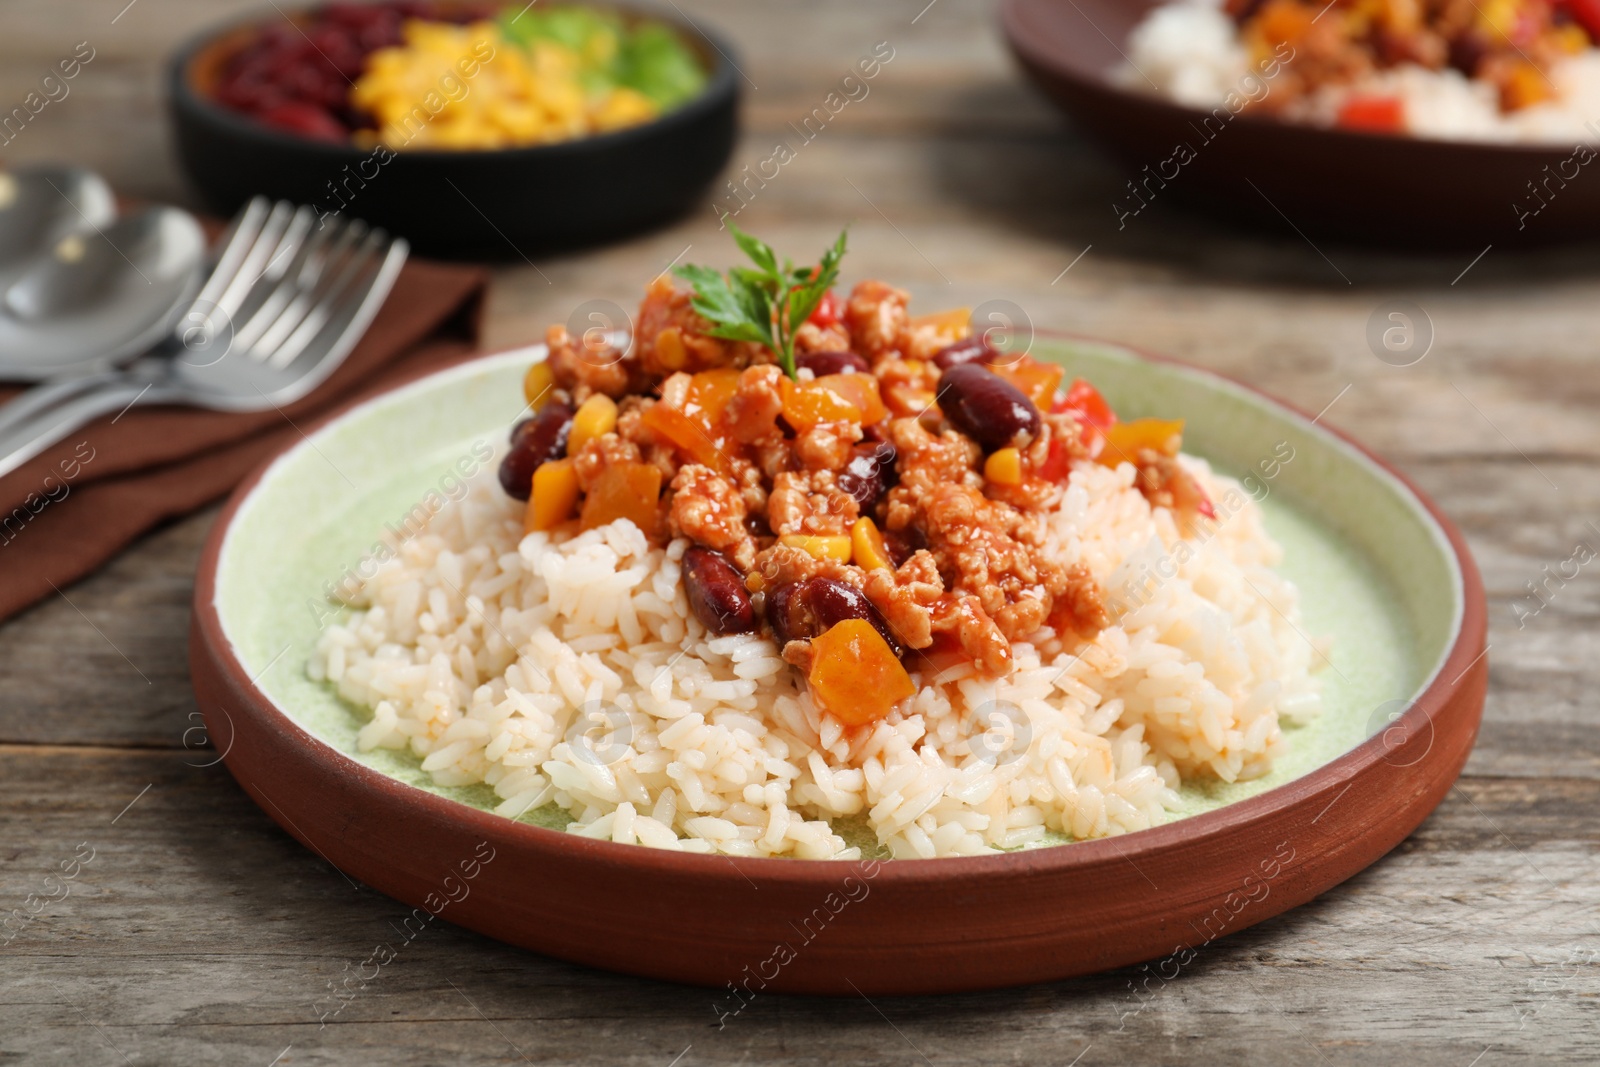 Photo of Chili con carne served with rice on table